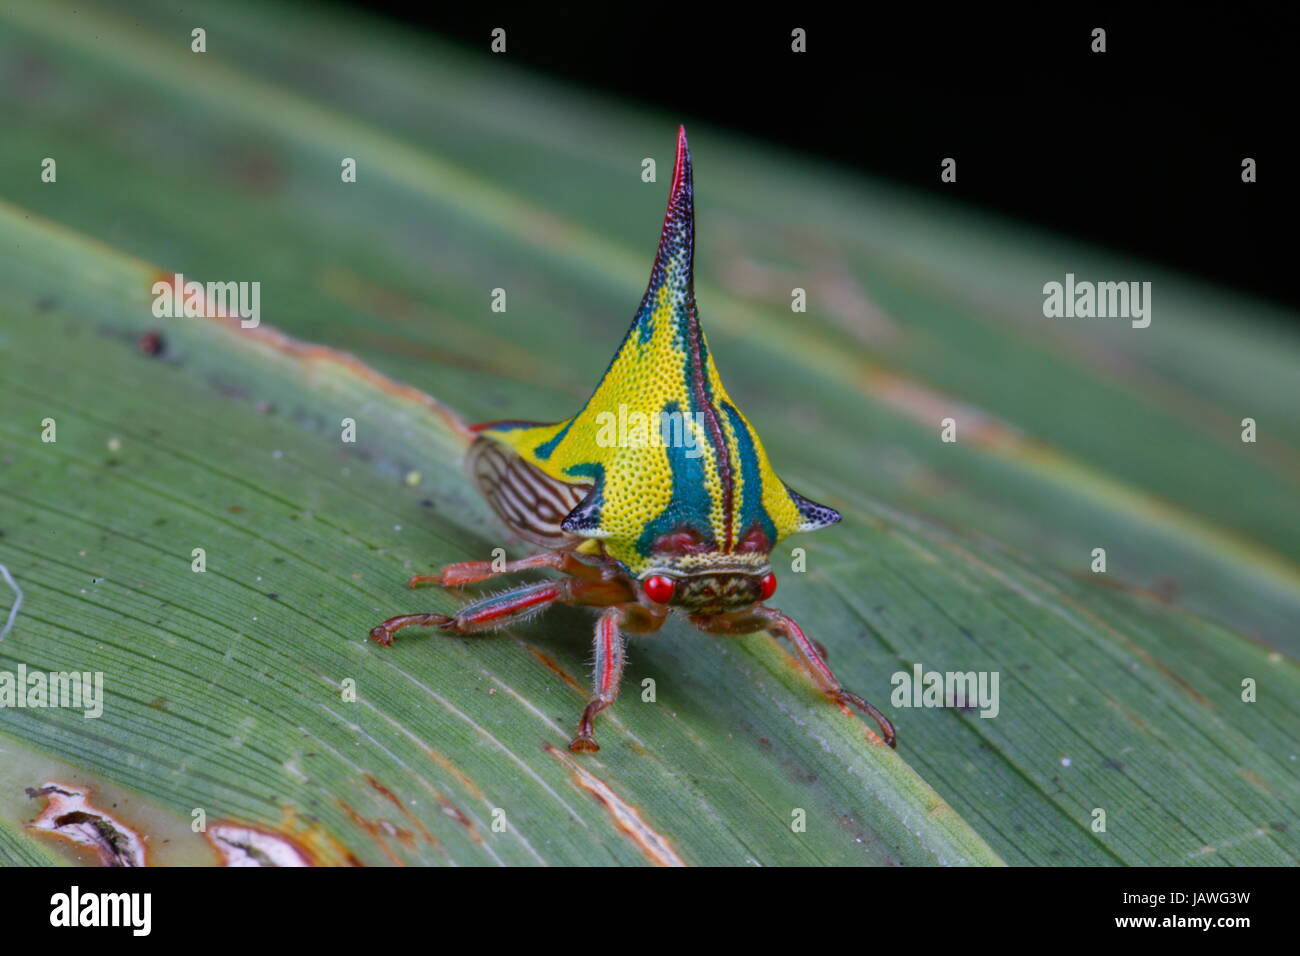 Thorn bug, Umbonia crassicornis, on a palm frond. Stock Photo